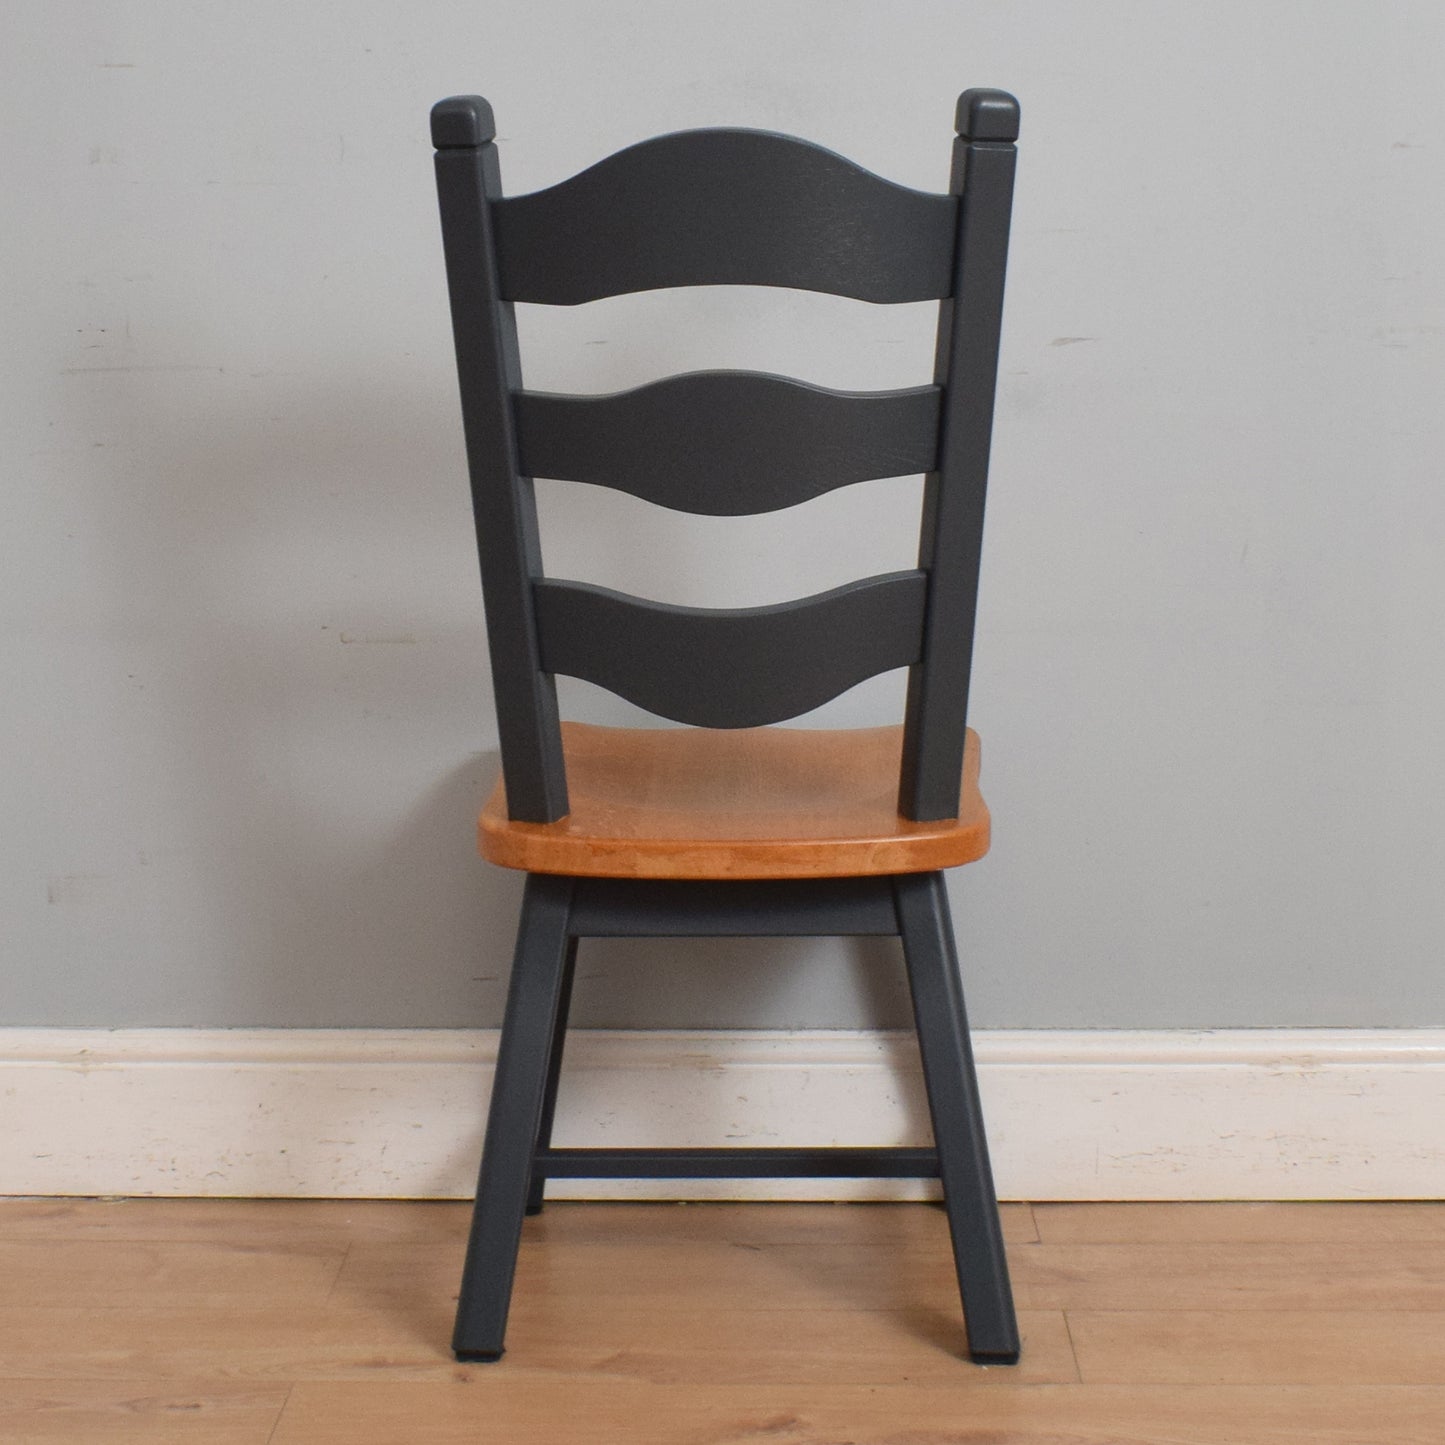 Painted Oak Table and Four Chairs